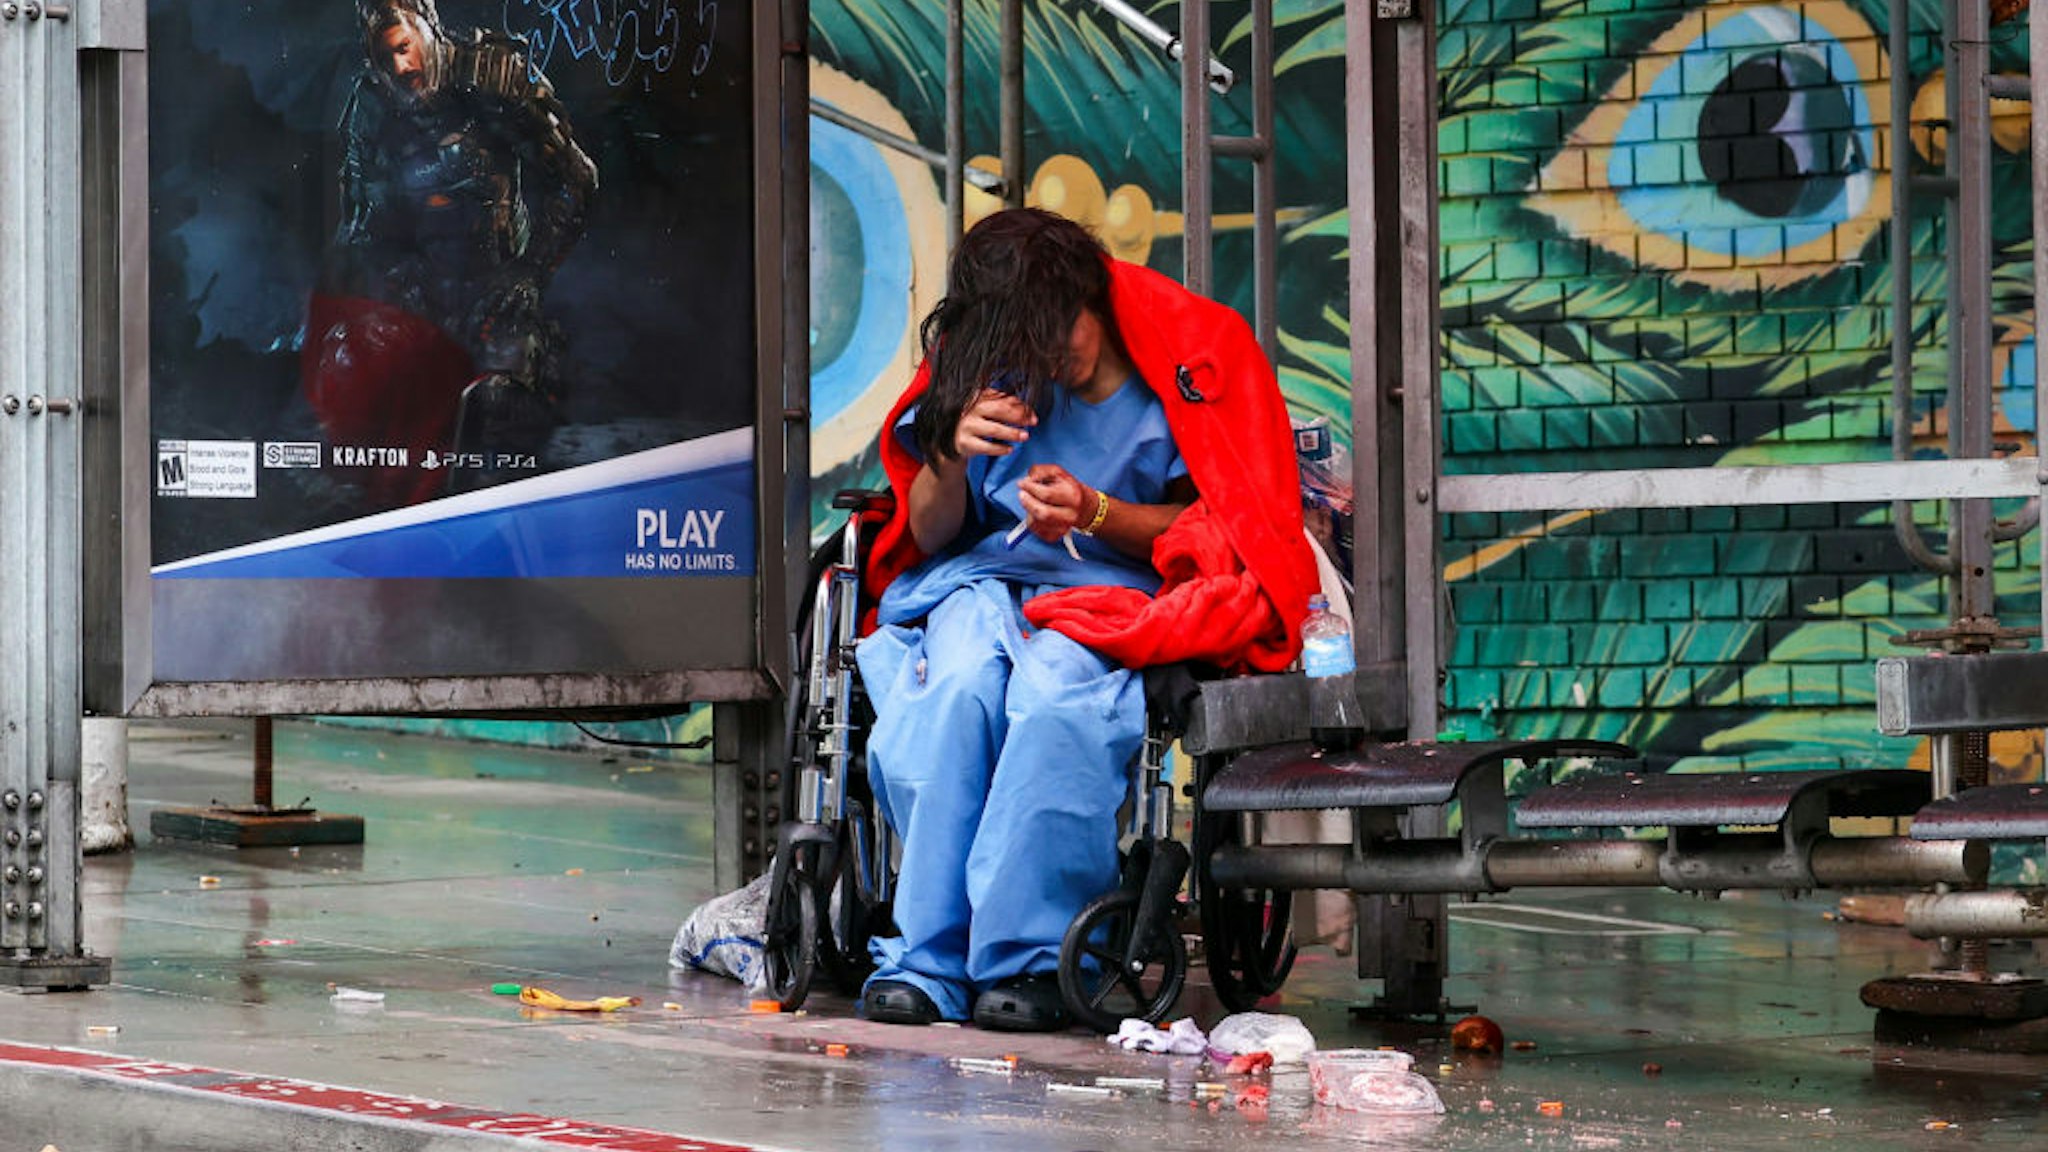 SAN FRANCISCO, CA - JANUARY 13: A homeless woman with wheelchair is seen on a bus stop near the City Hall during rainy day in San Francisco on January 13, 2023 as atmospheric river storms hit California, United States. (Photo by Tayfun Coskun/Anadolu Agency via Getty Images)